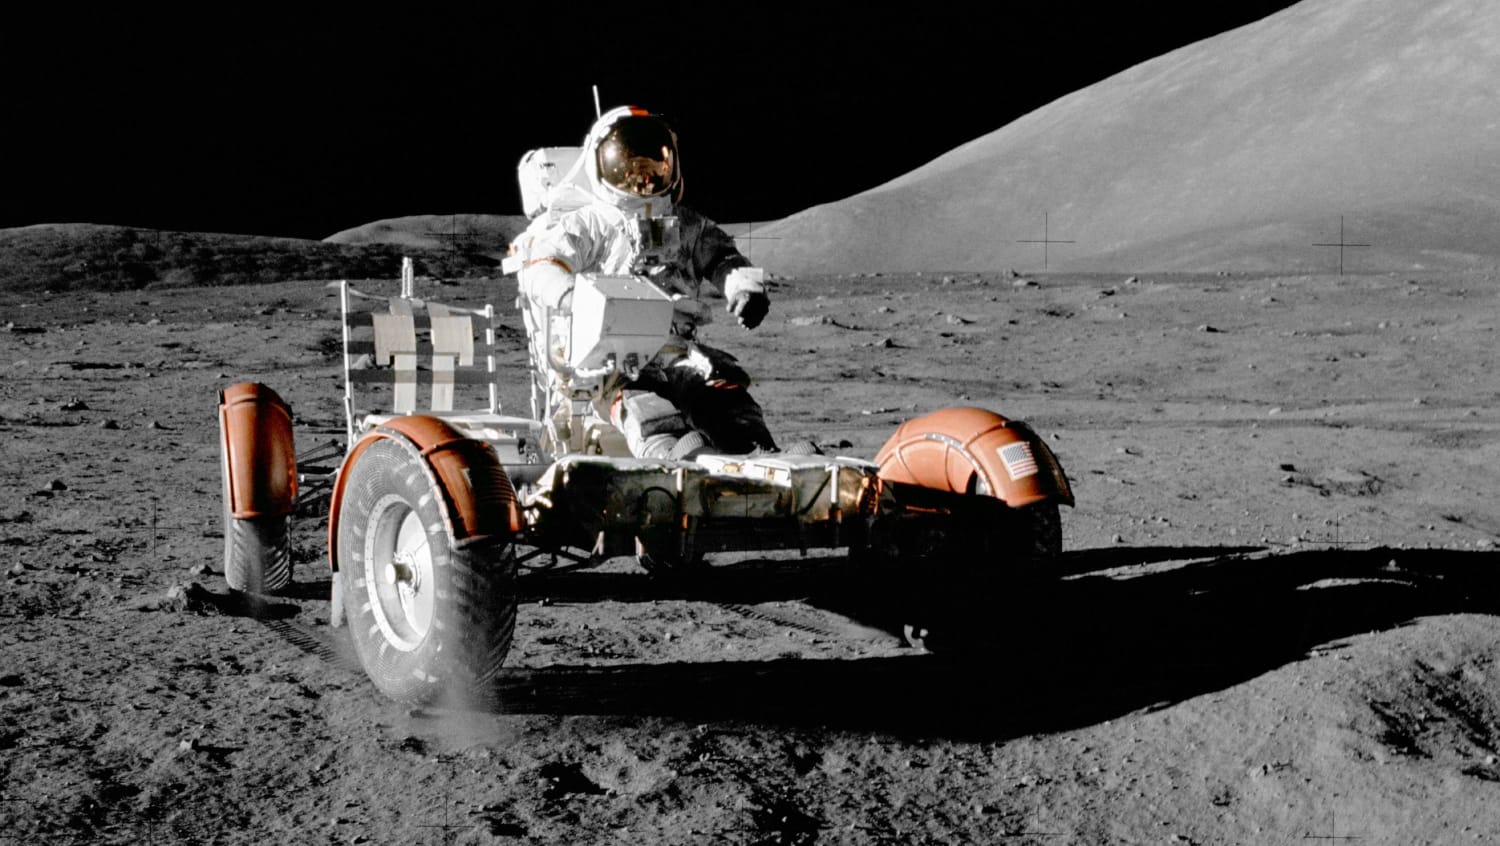 Get The Details On All 21 Successful Moon Landings With This Interactive Map